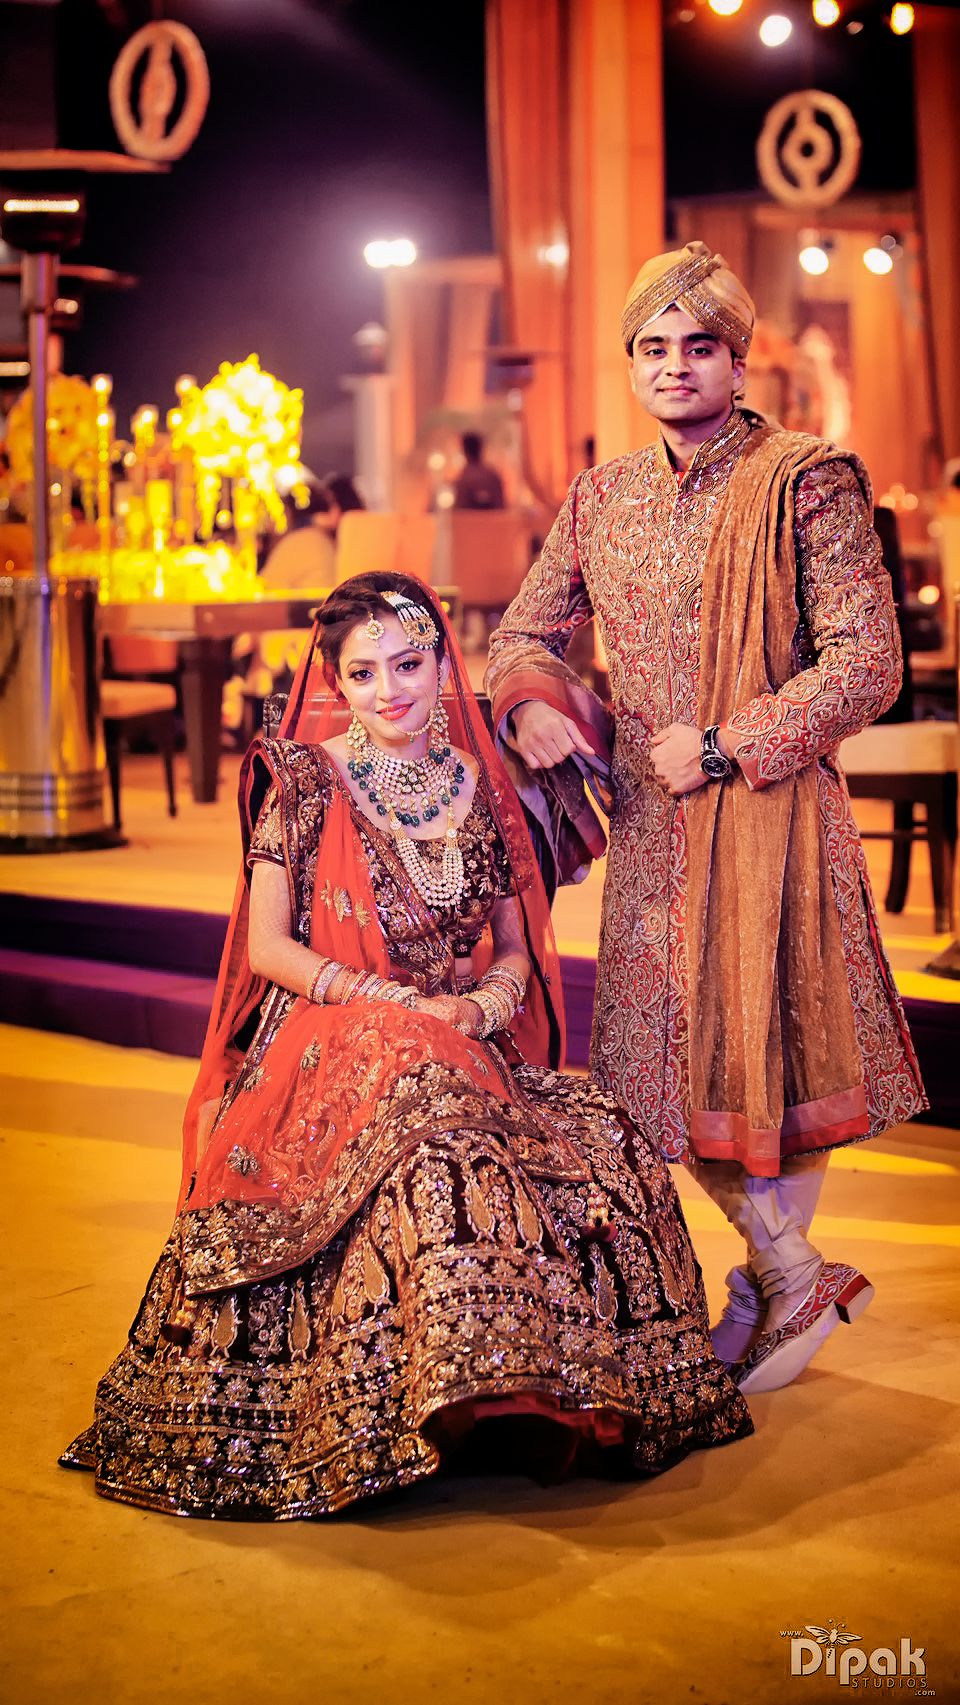 Photo of Royal Indian Bride and Groom